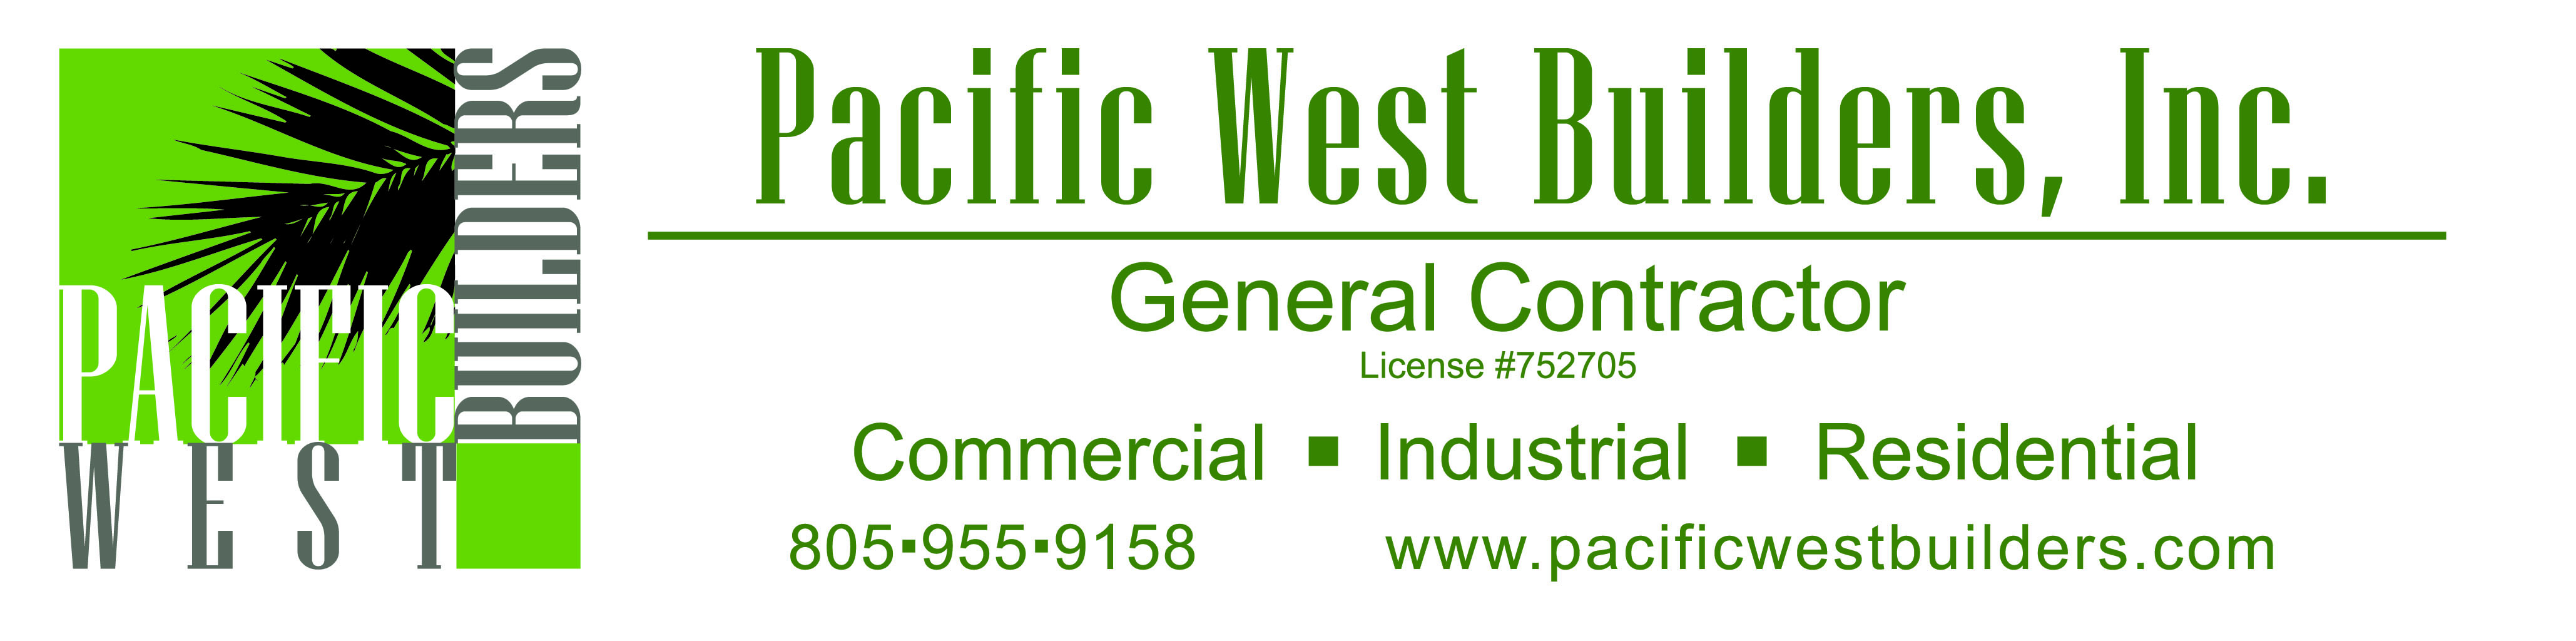 Pacific West Logo